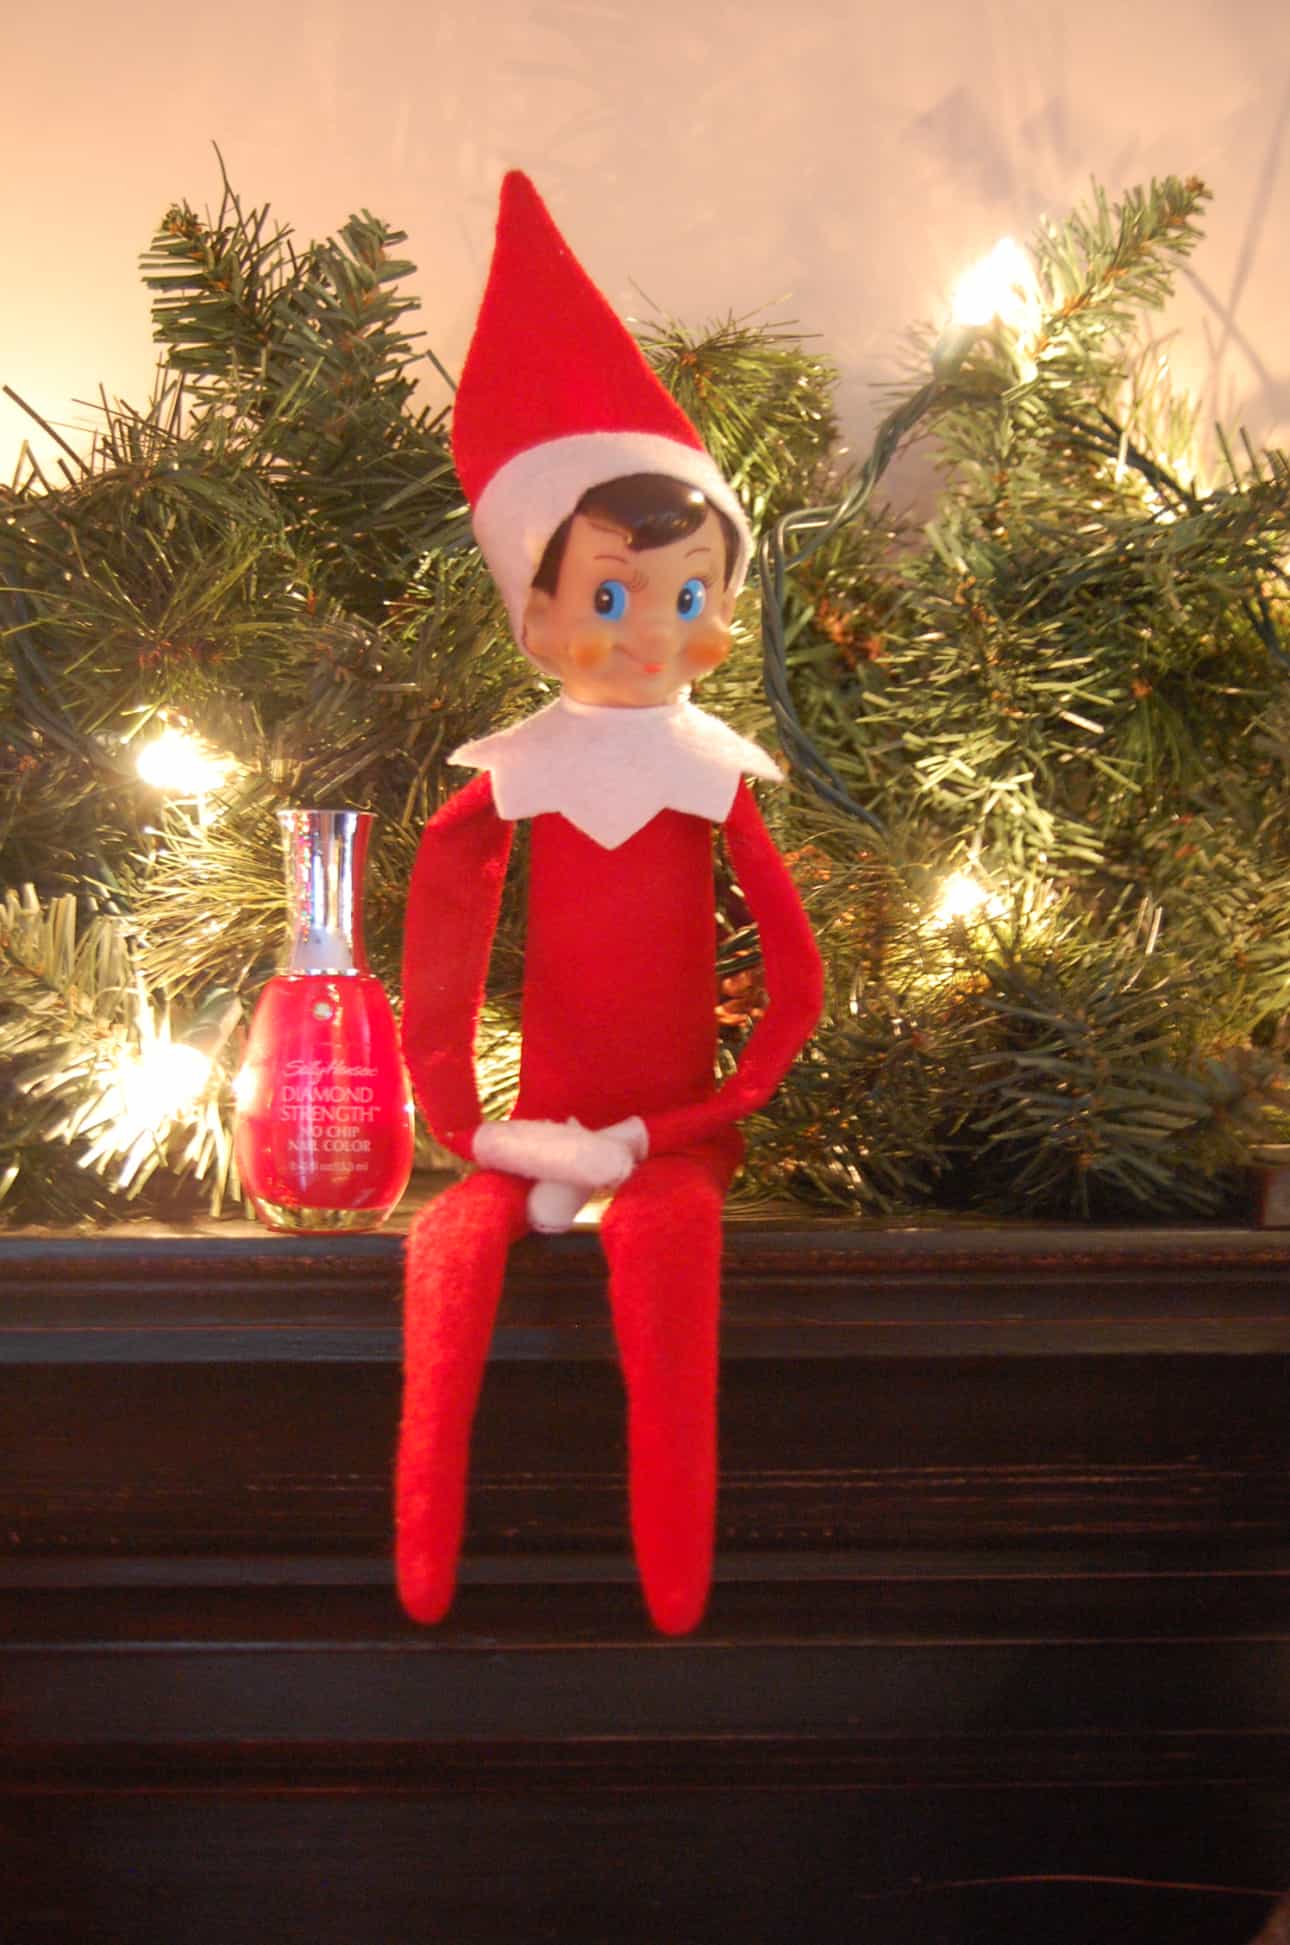 13. Elfie on the Console Table